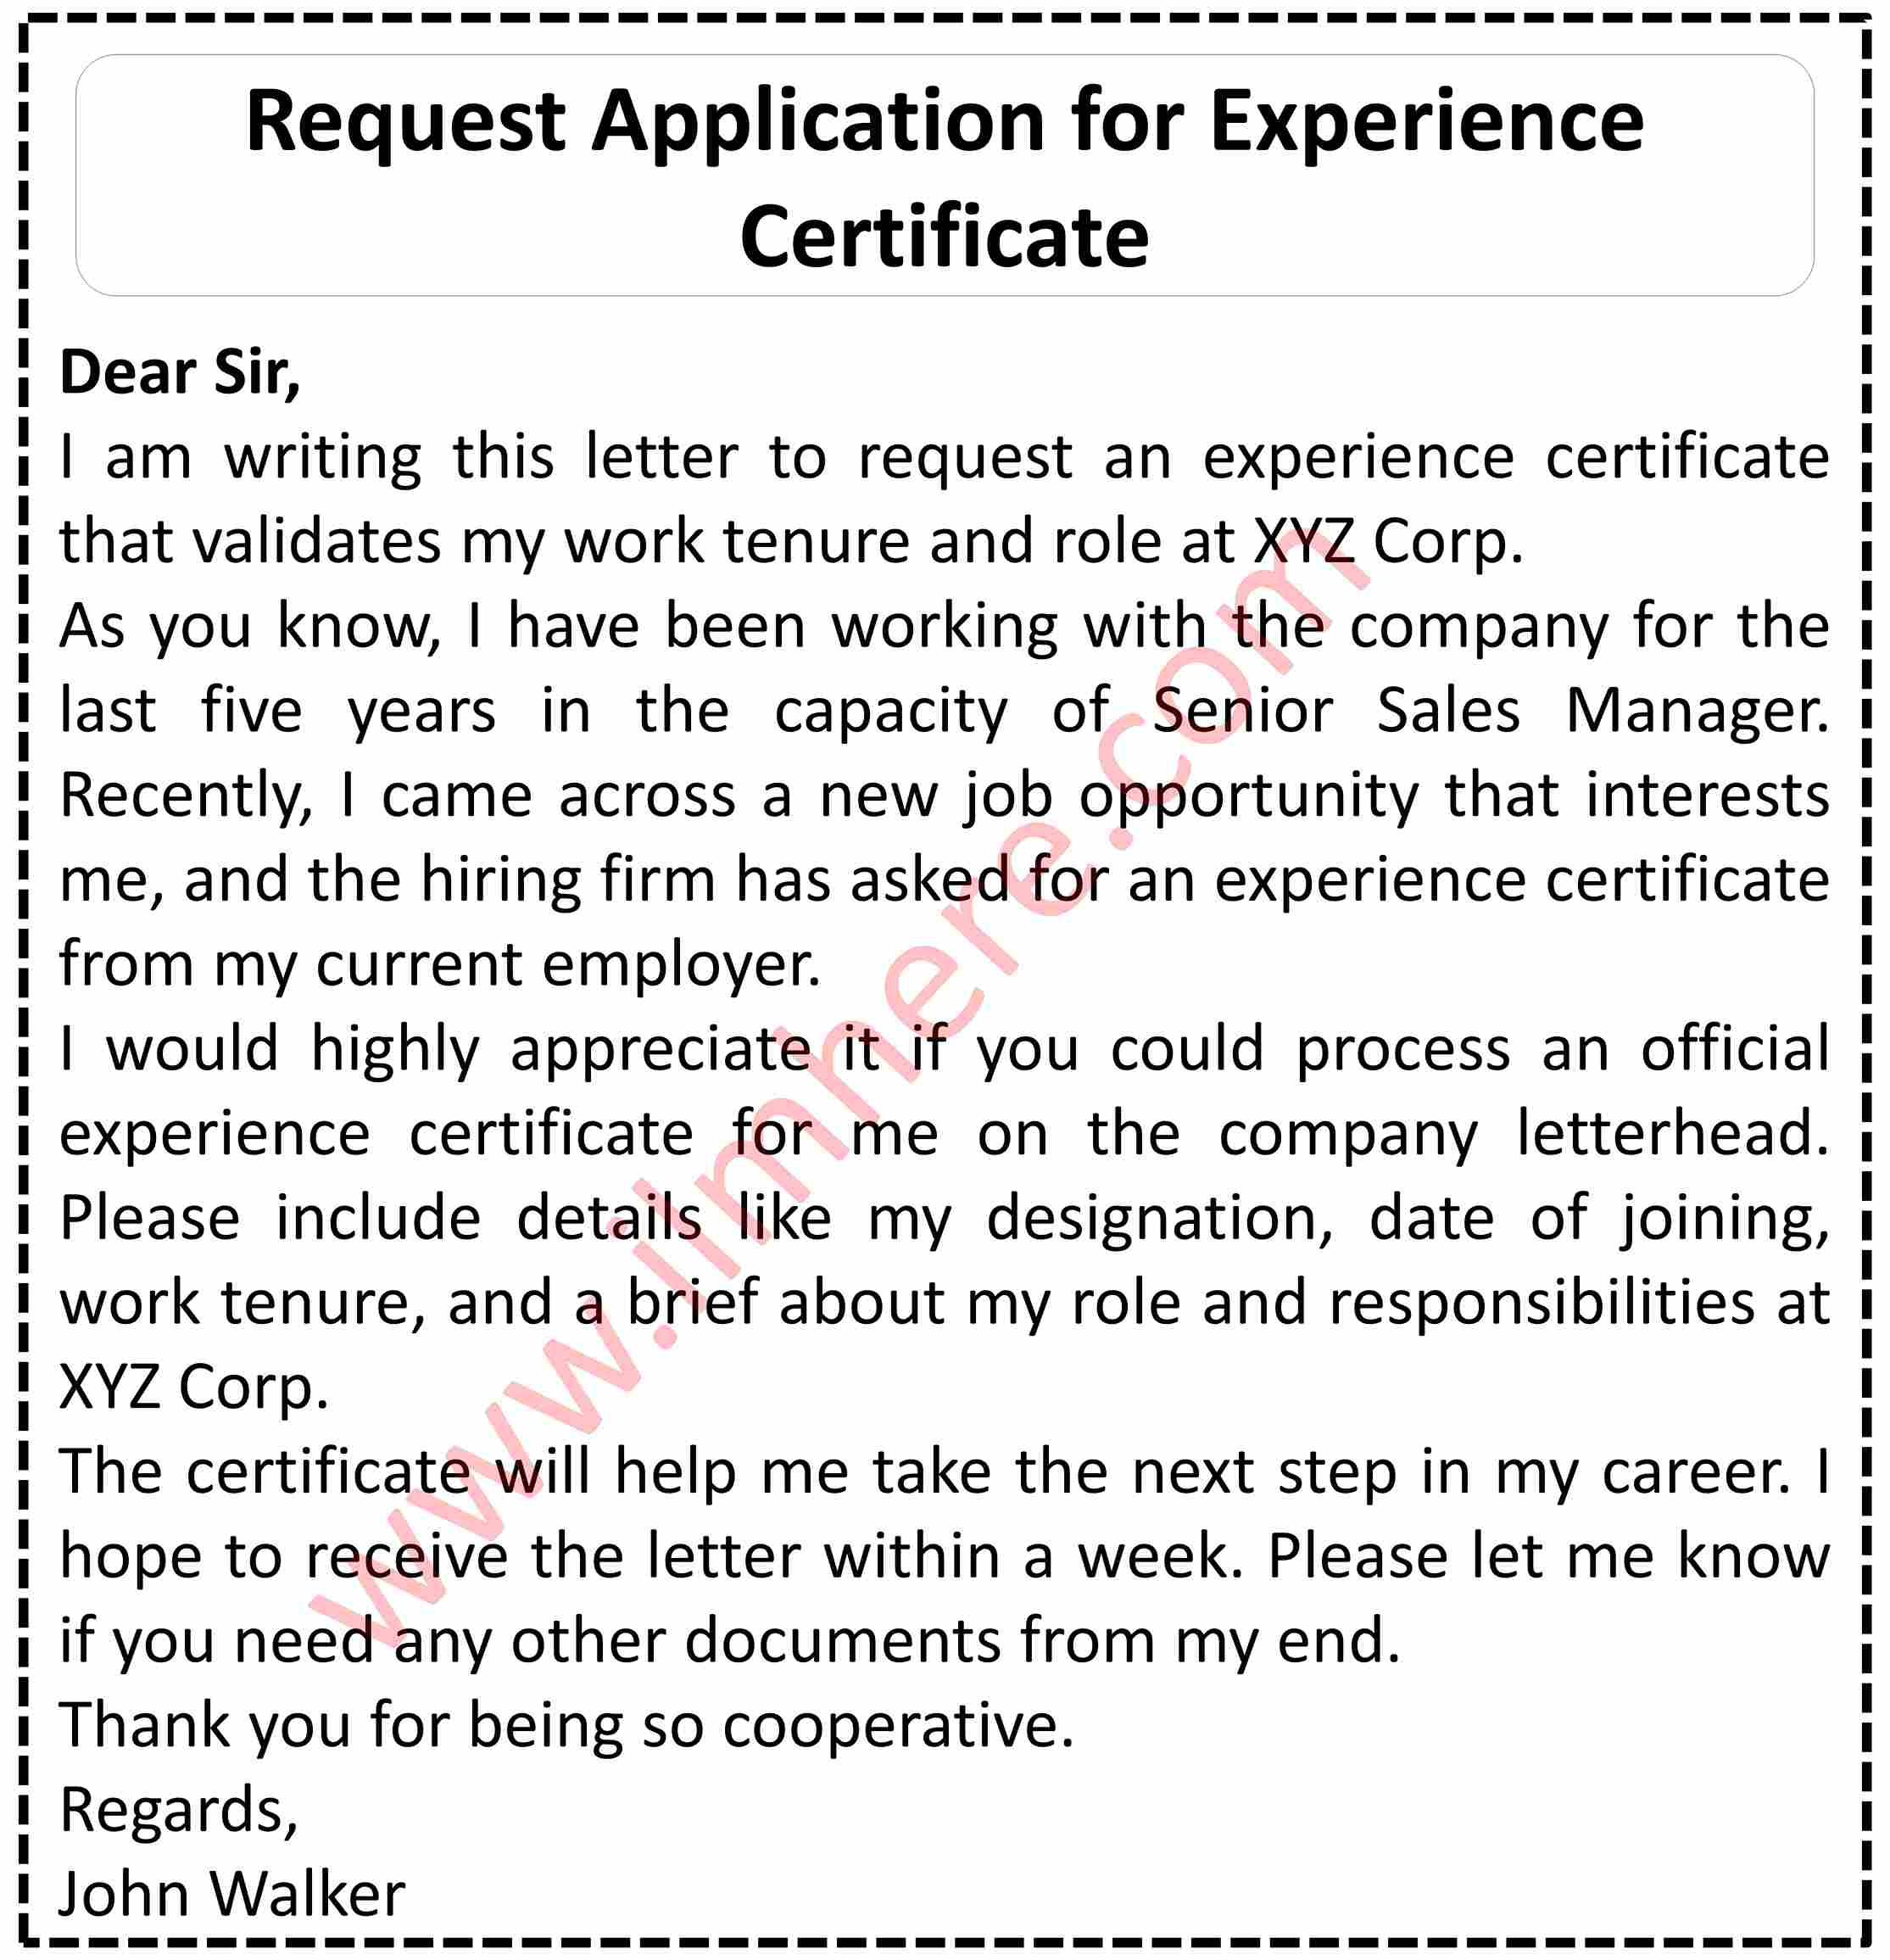 Request Application for Experience Certificate